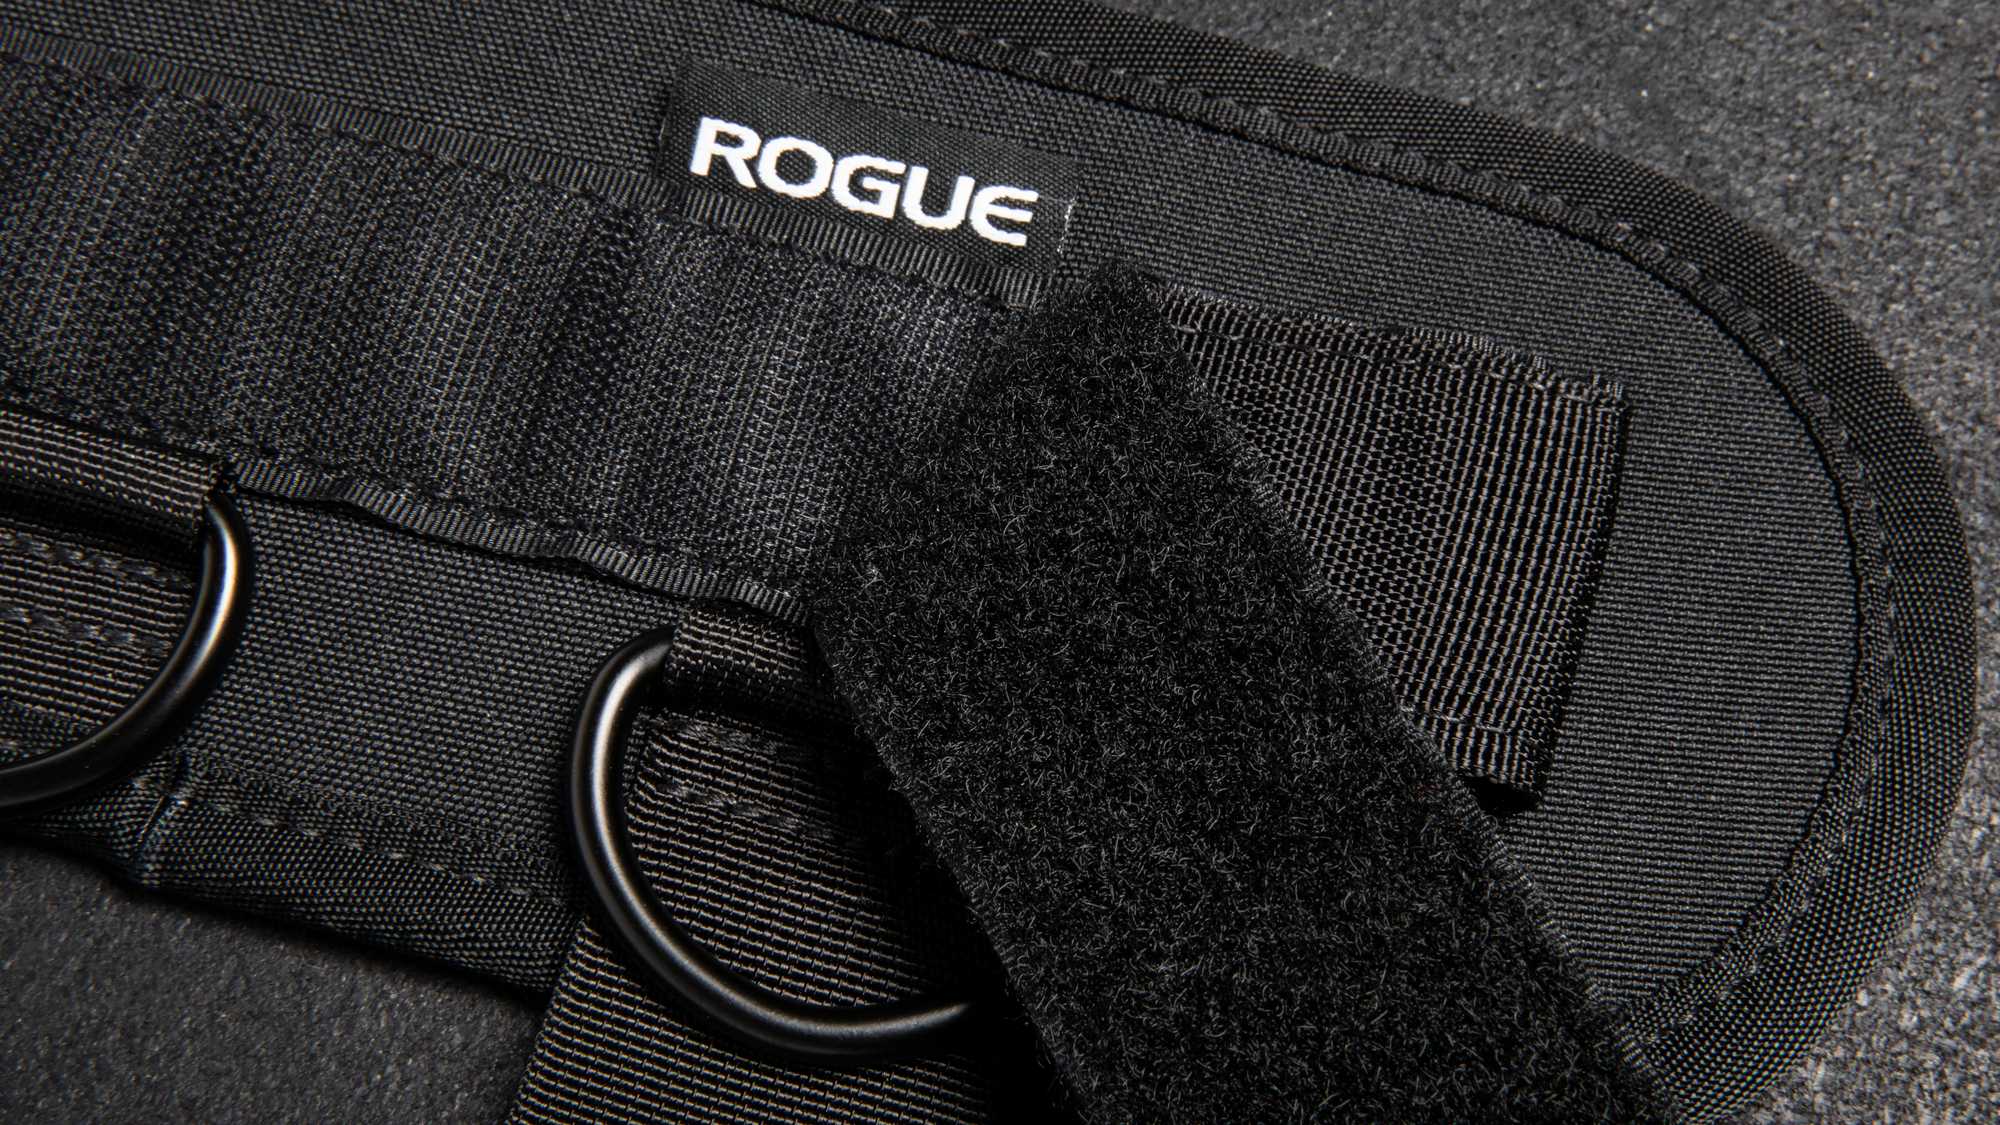 Rogue Ankle Cuff Cable Attachment (Pair)